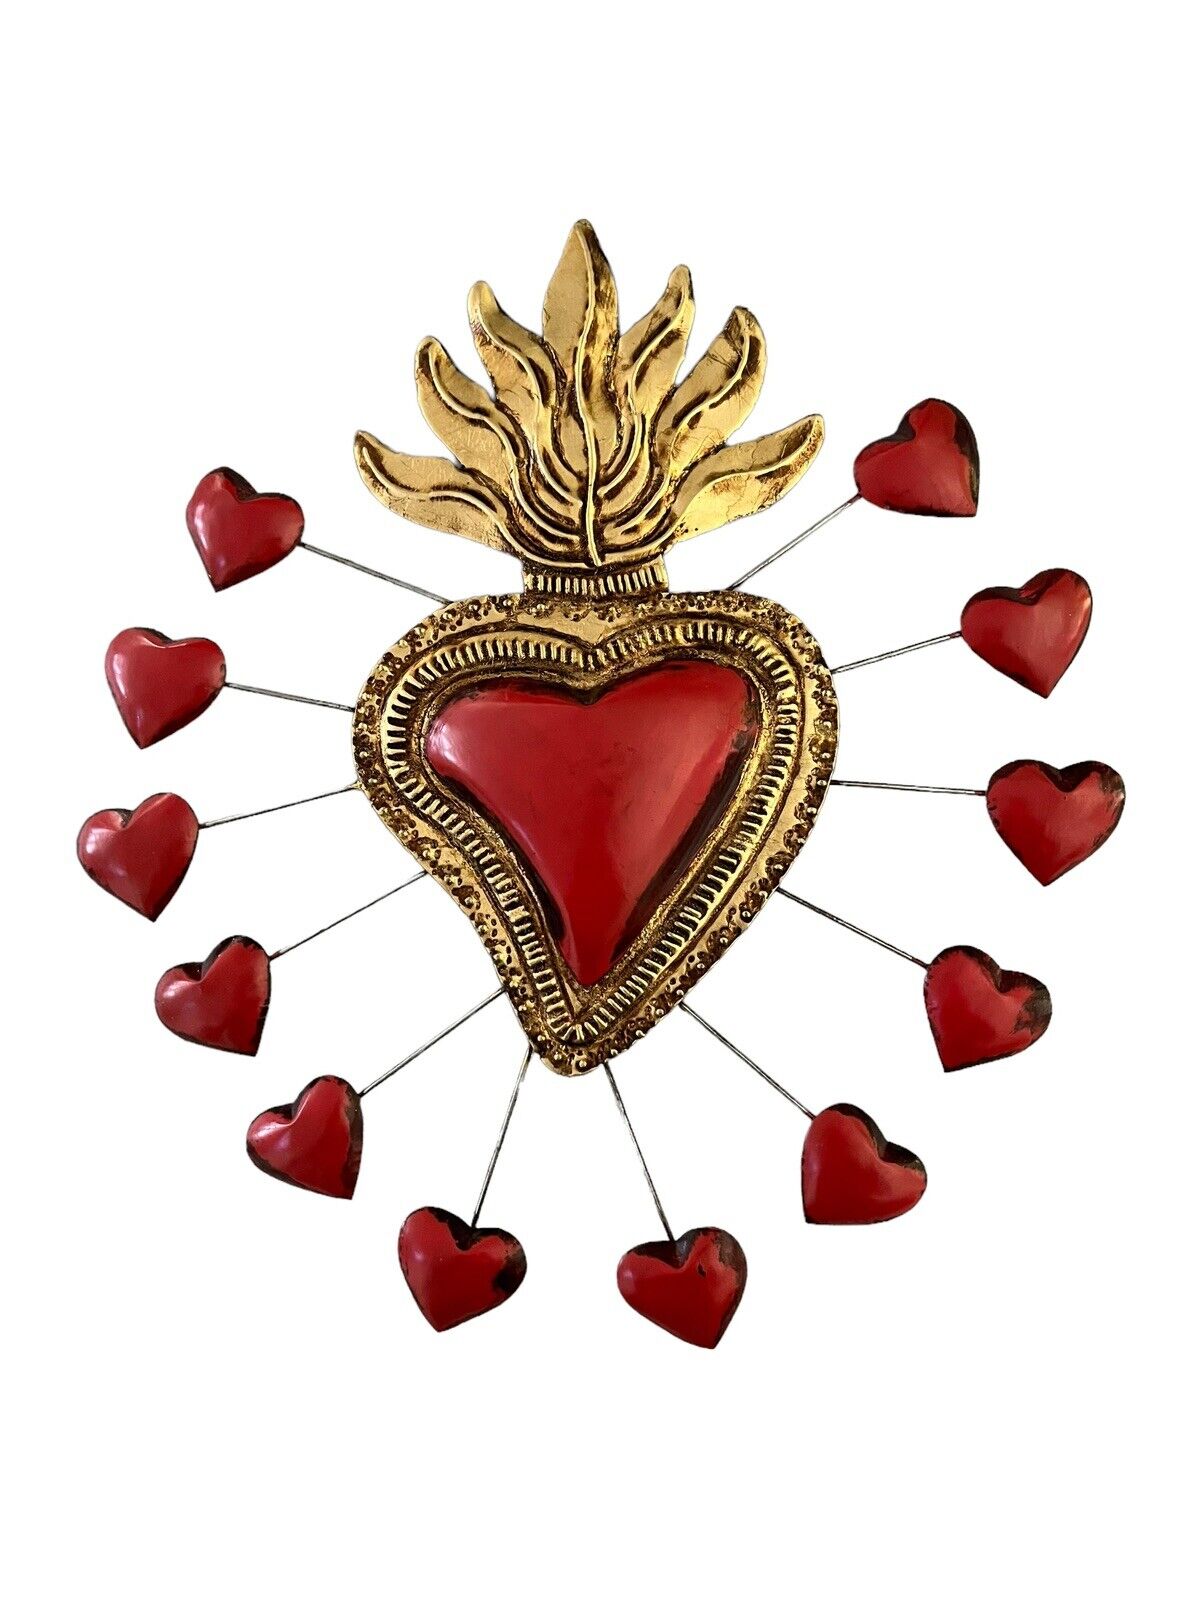 Tin HEART with Hearts, Mexican SACRED Heart, Red Gold Corazon